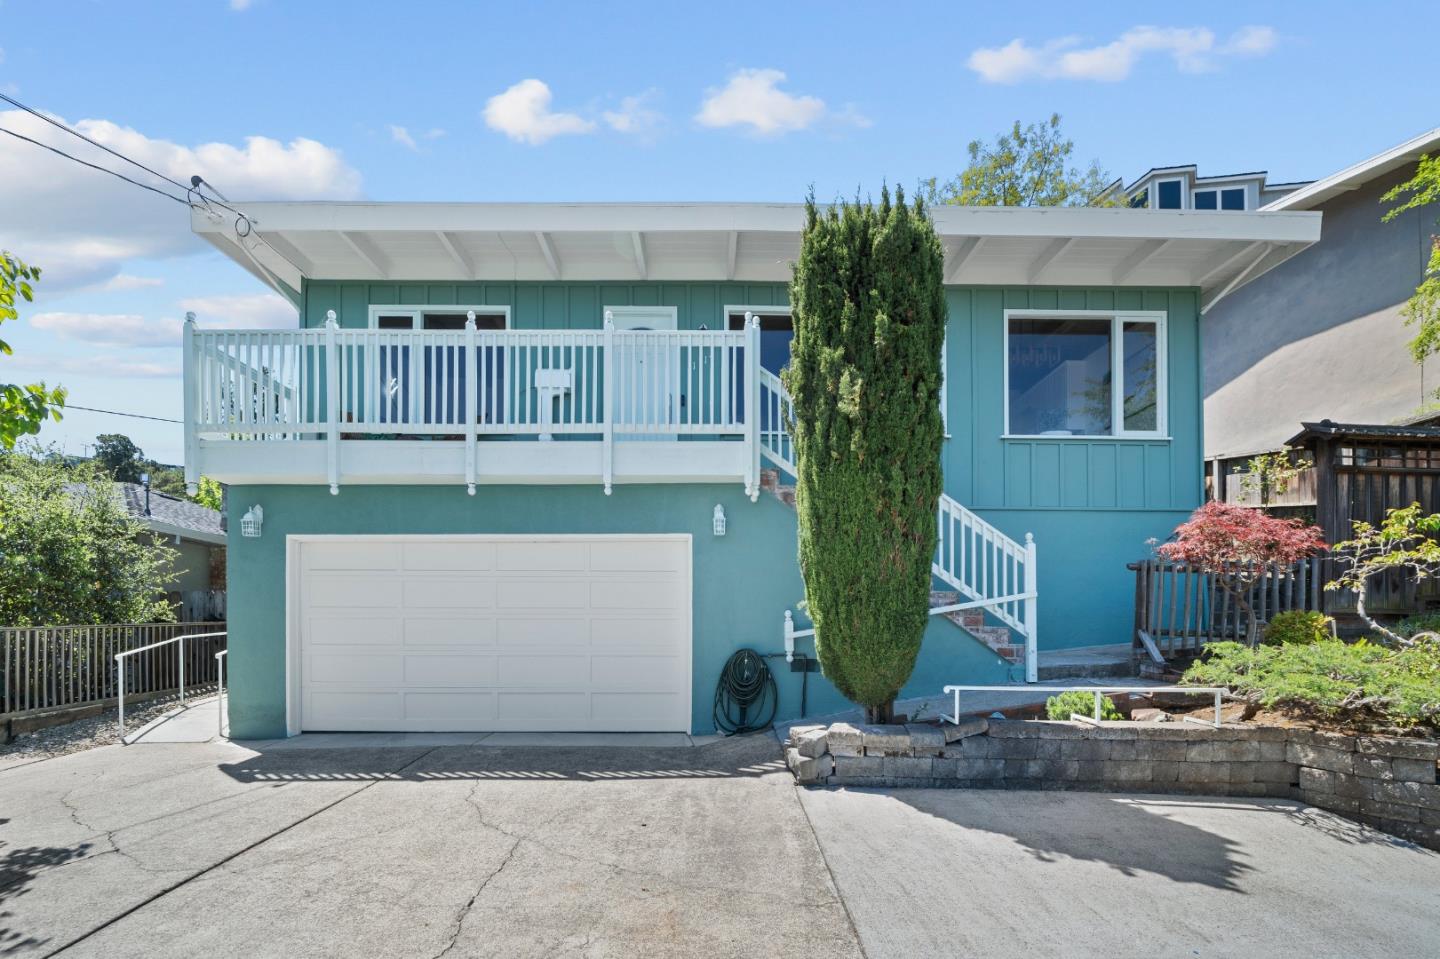 Photo of 1717 Hillman Ave in Belmont, CA